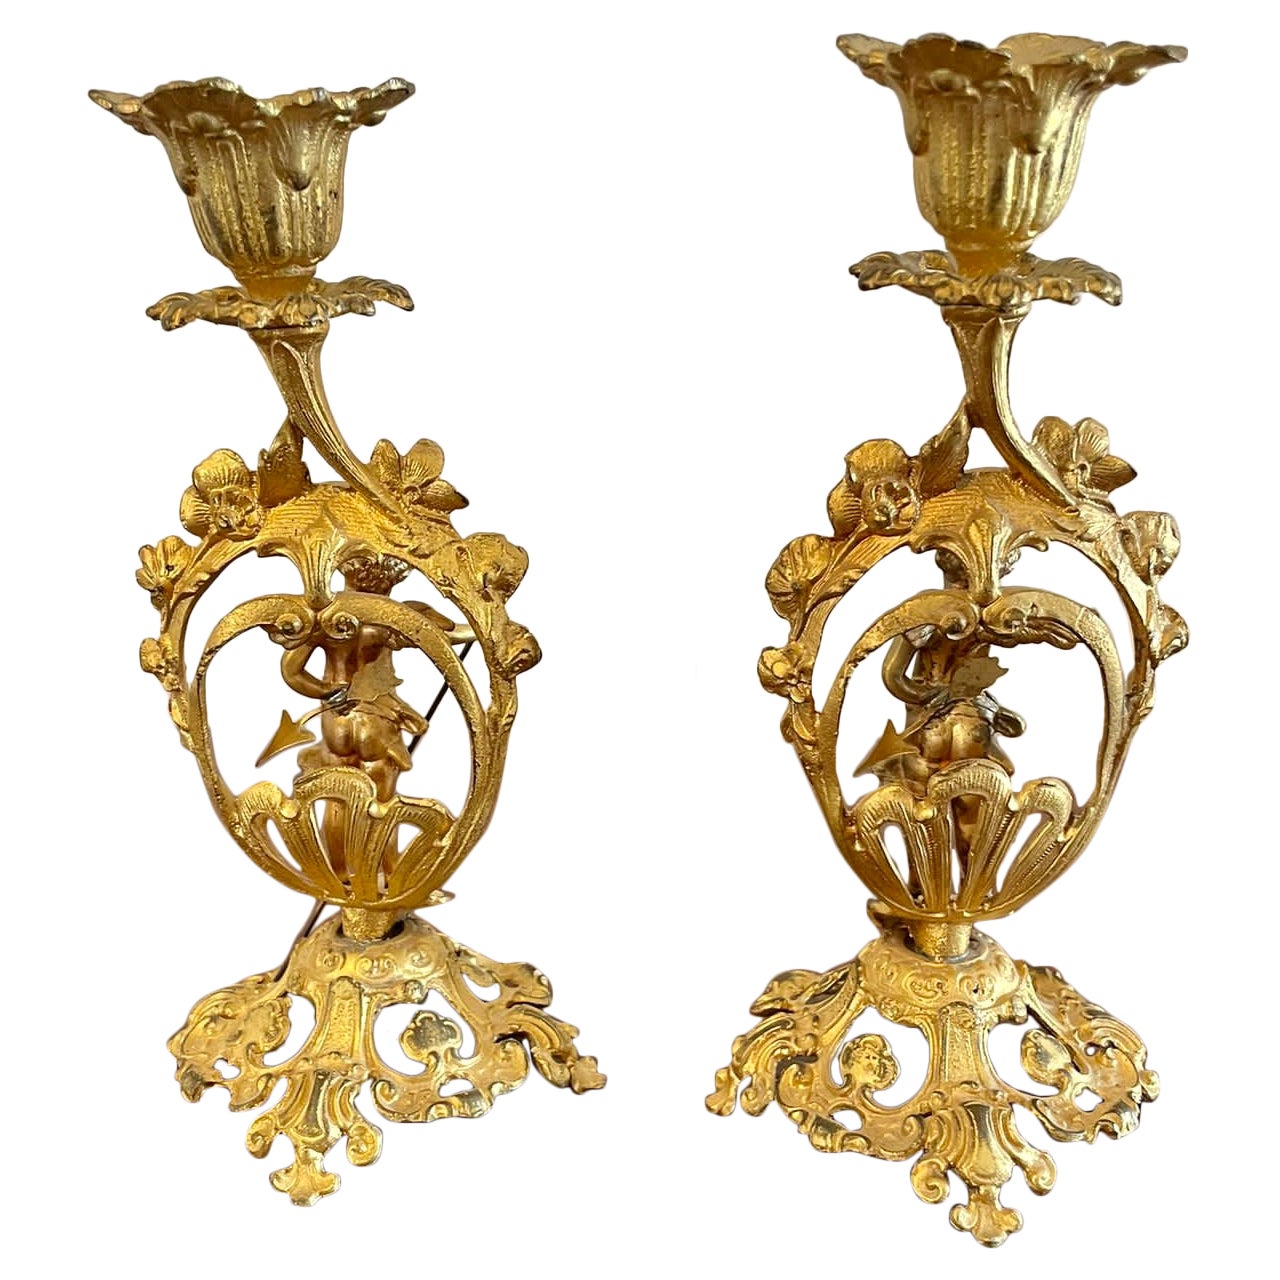 Antique Pair of Fine French Victorian Ornate Gilded Candlesticks 